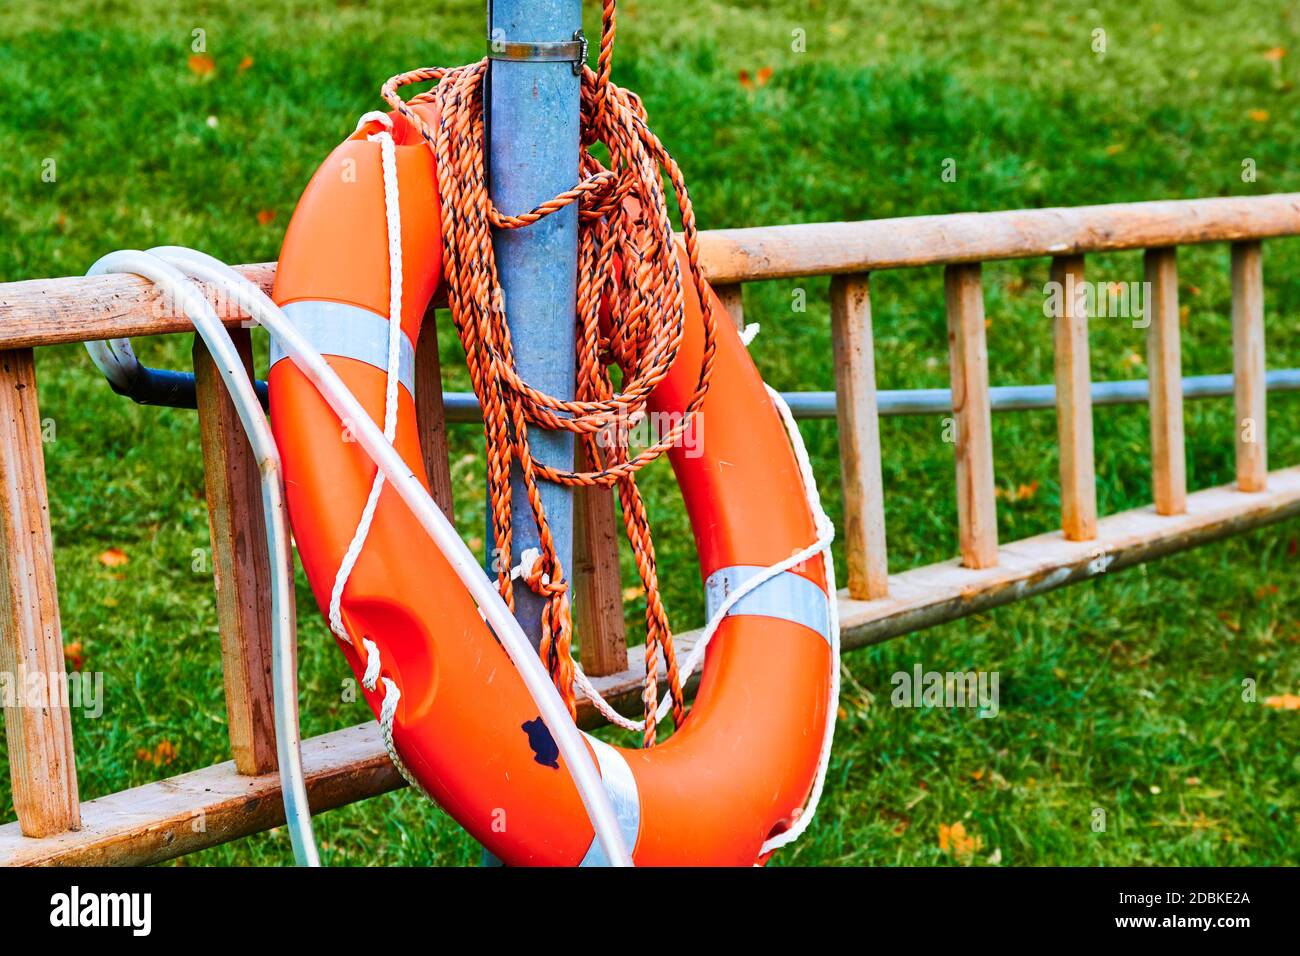 Ladder and orange lifebuoy at the edge of a lake in a park. Stock Photo